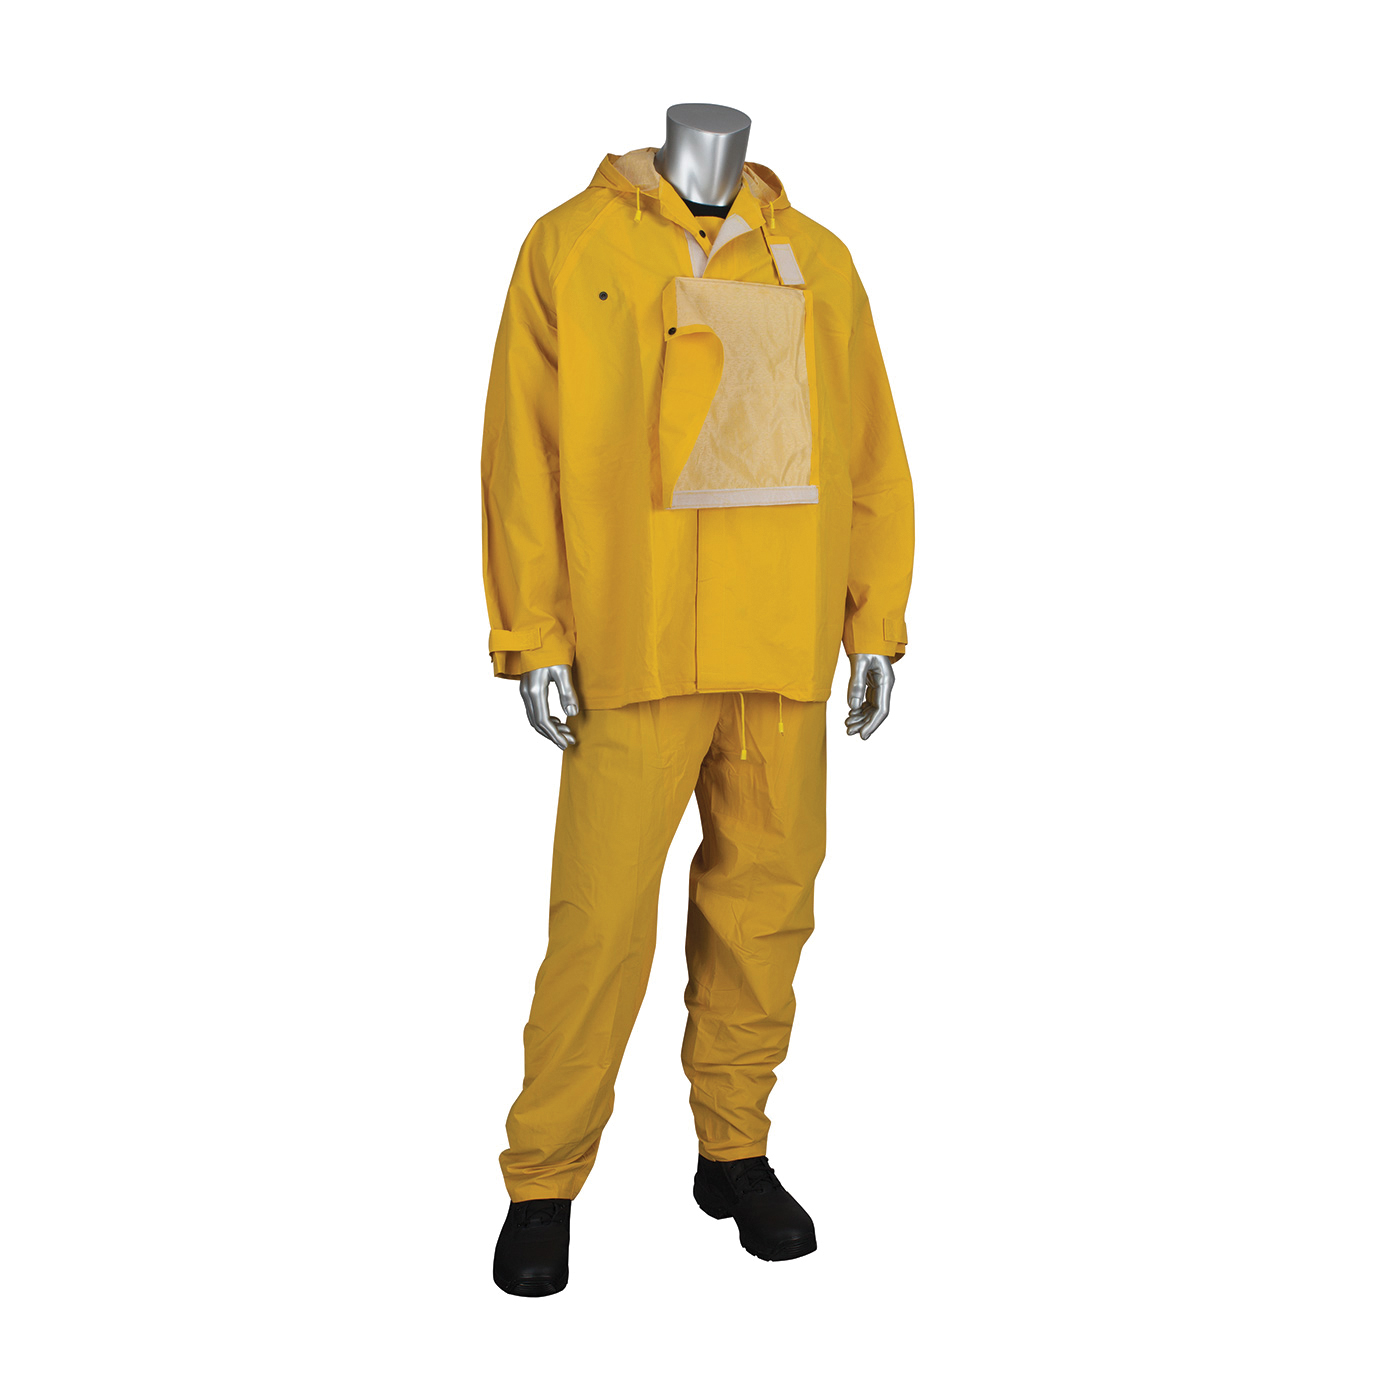 PIP® FALCON™ HydroFR™ 205-375FR/S 2-Piece Rainsuit, S, Yellow, Polyester/PVC, 46 in Waist, 29 in L Inseam, Detachable Hood